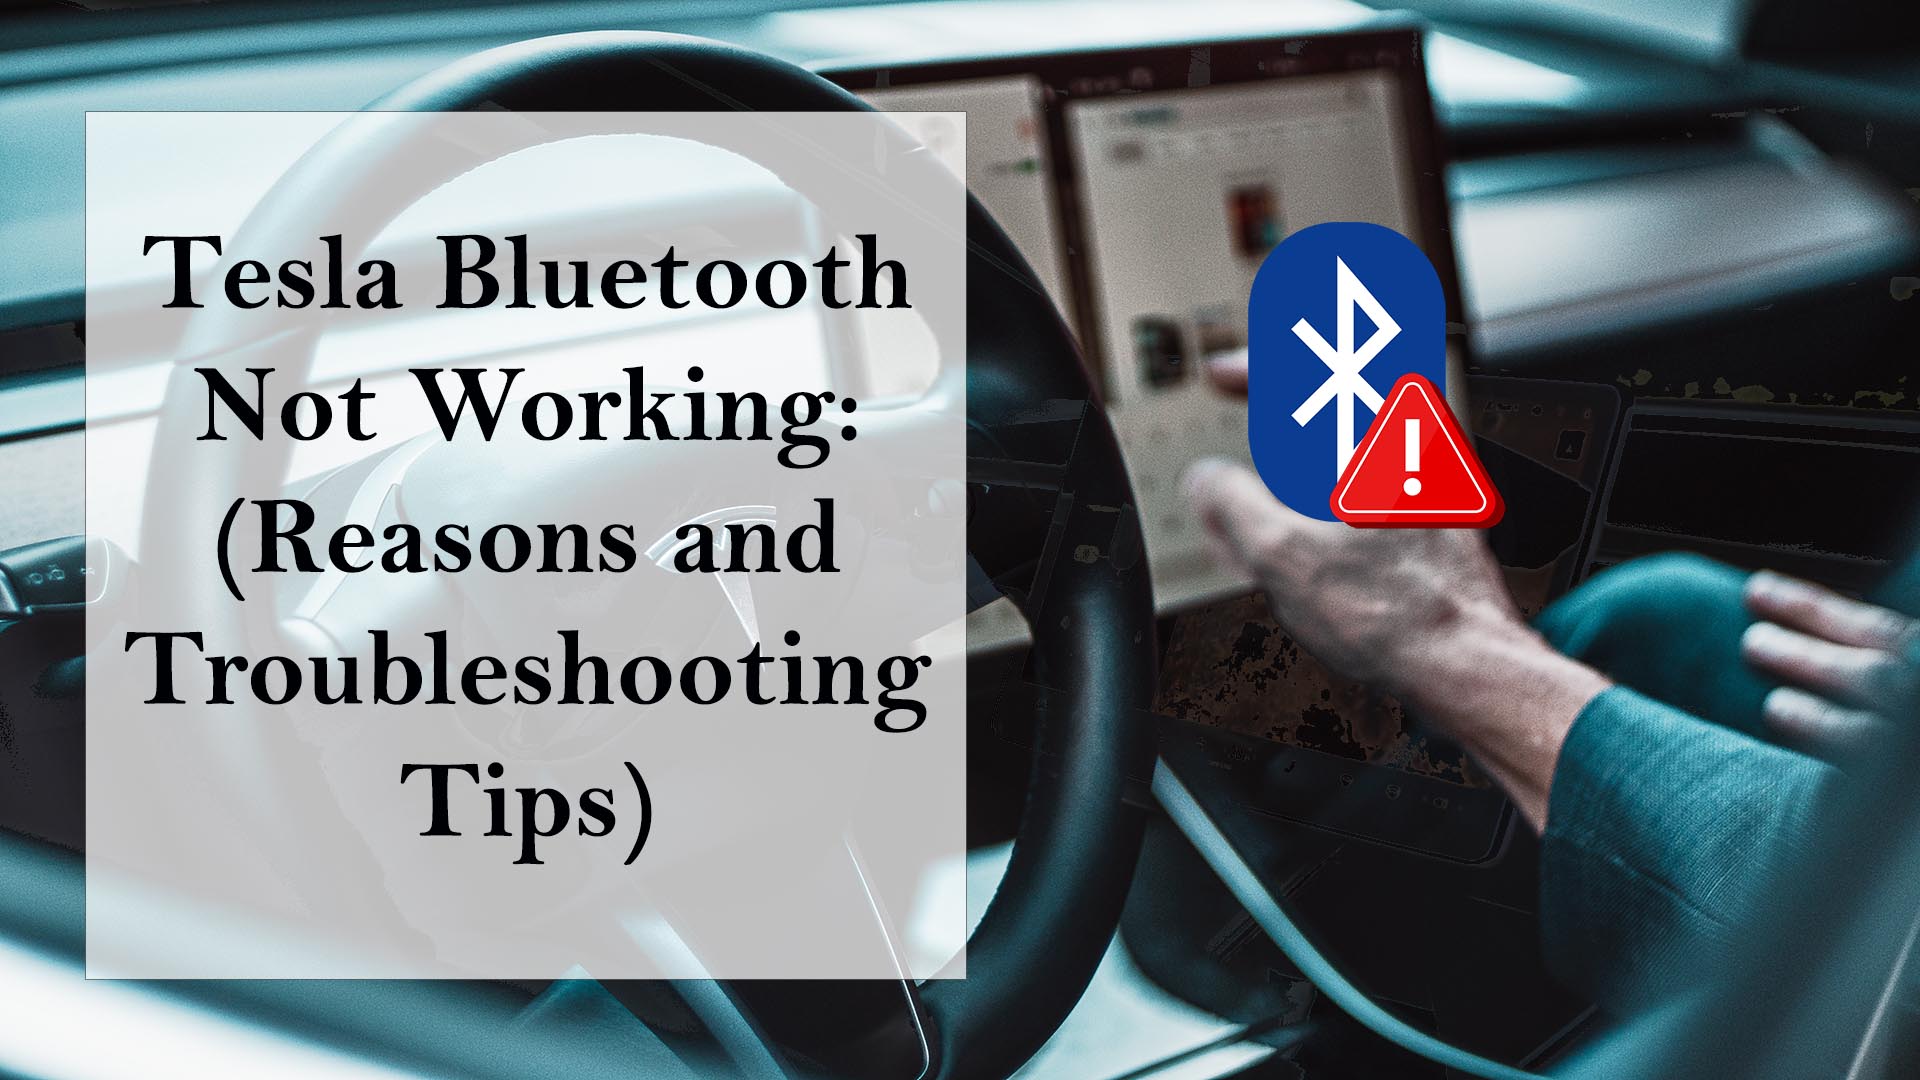 Tesla Bluetooth Not Working: Reasons and Troubleshooting Tips